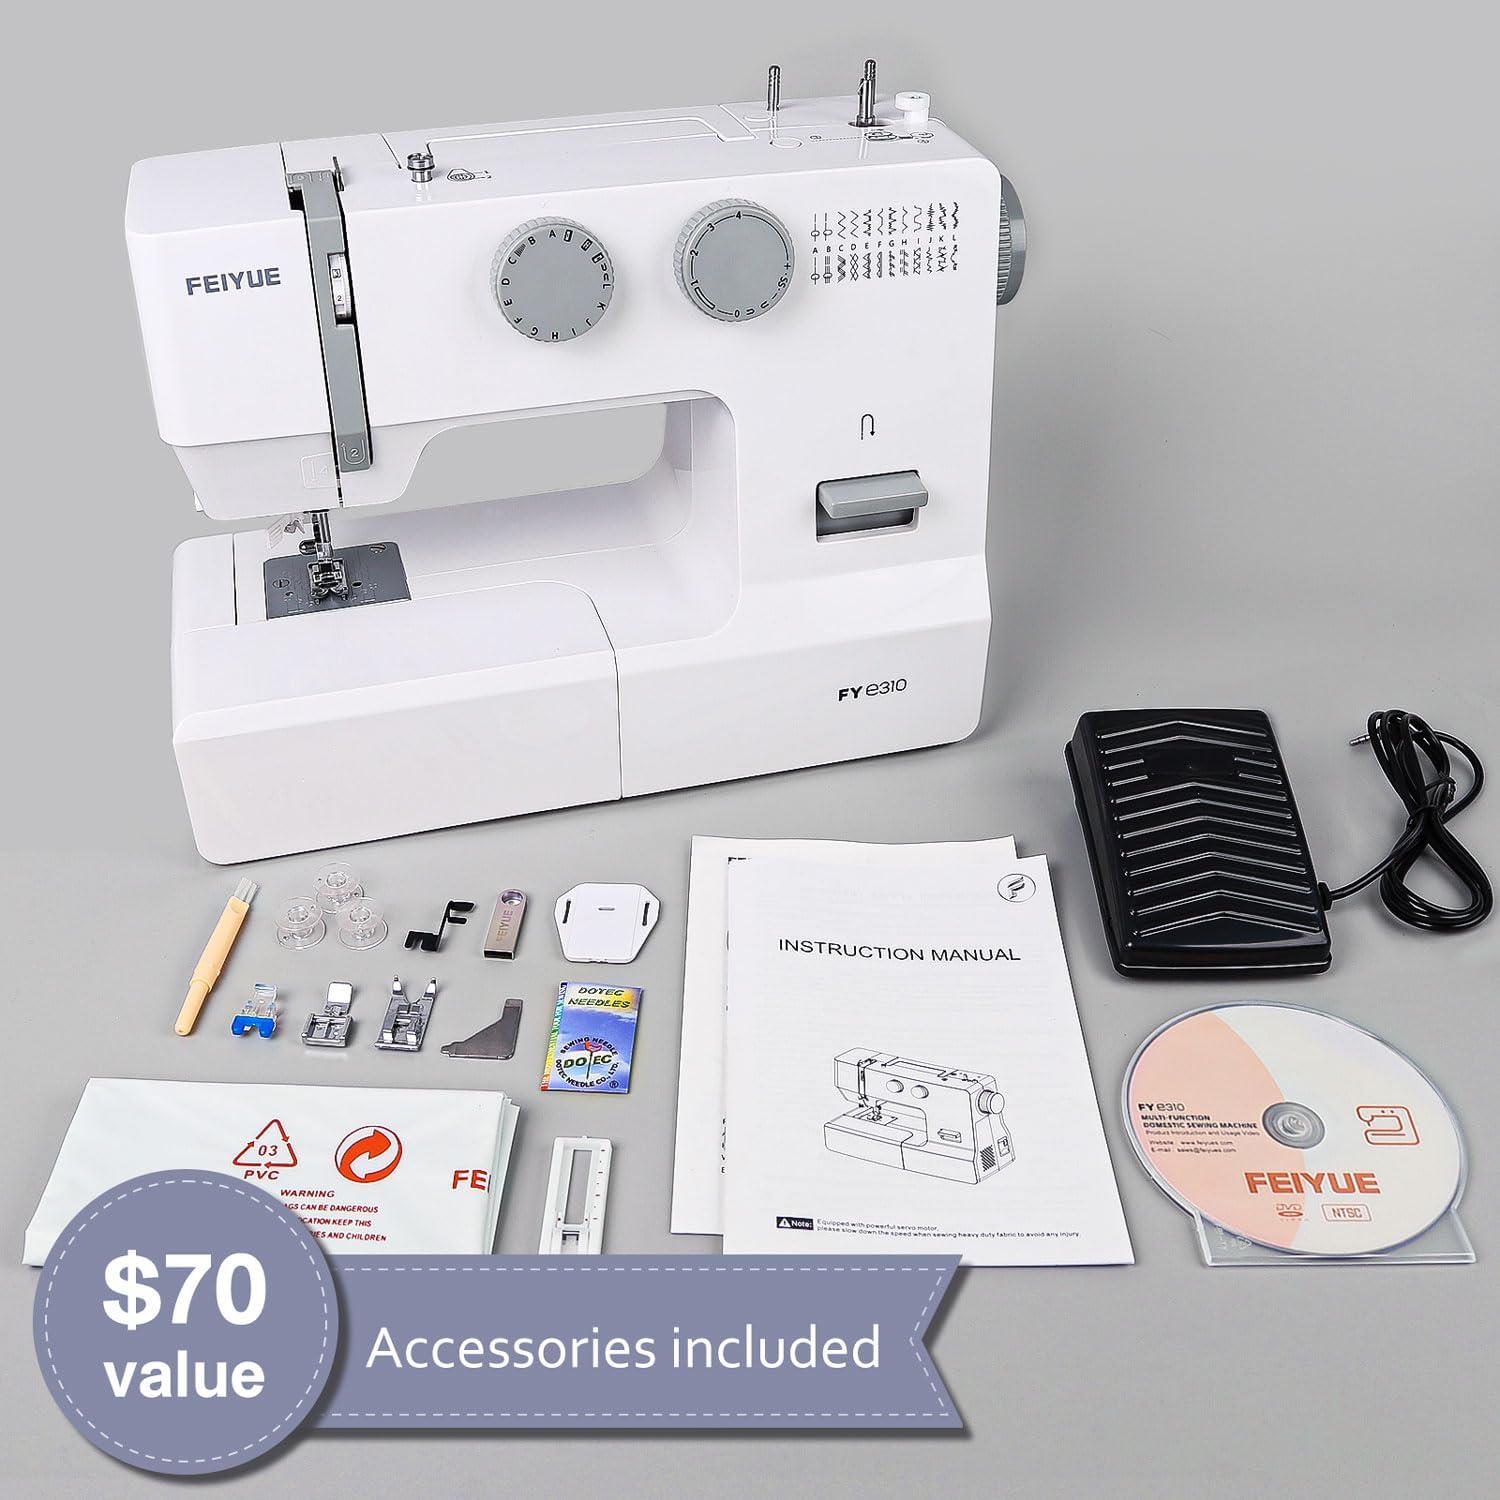 FEIYUE FYe310, Sewing Machine with Accessory Kit, 105 Stitch Applications,  100W Servo Motor, Heavy Duty Interior Metal Frame, Dual LED Lights, Easy to  Use (White)